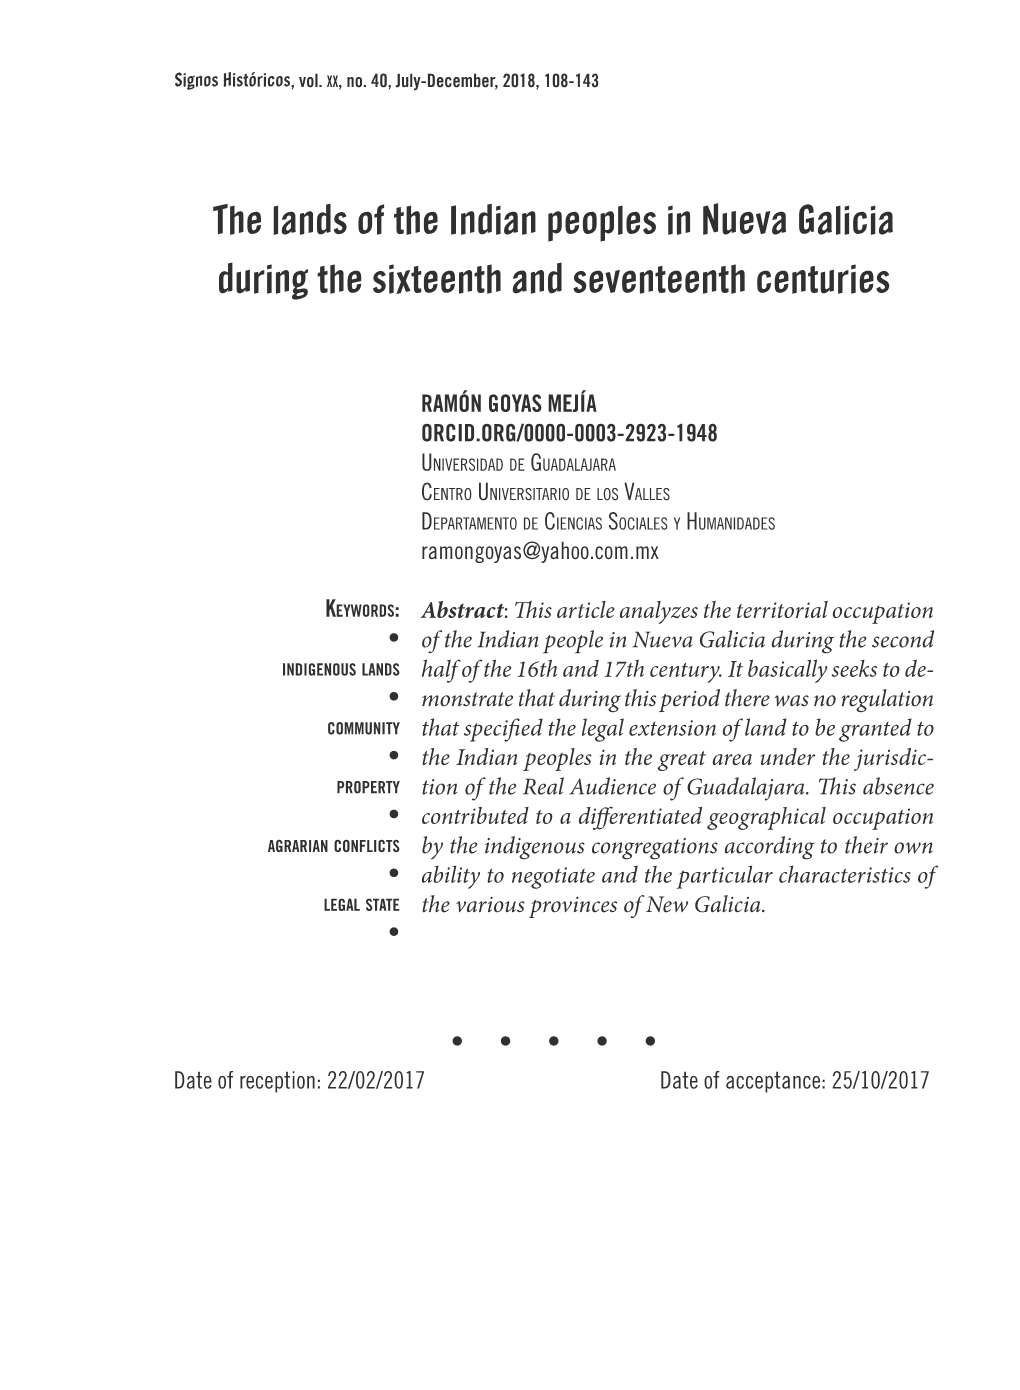 The Lands of the Indian Peoples in Nueva Galicia During the Sixteenth and Seventeenth Centuries